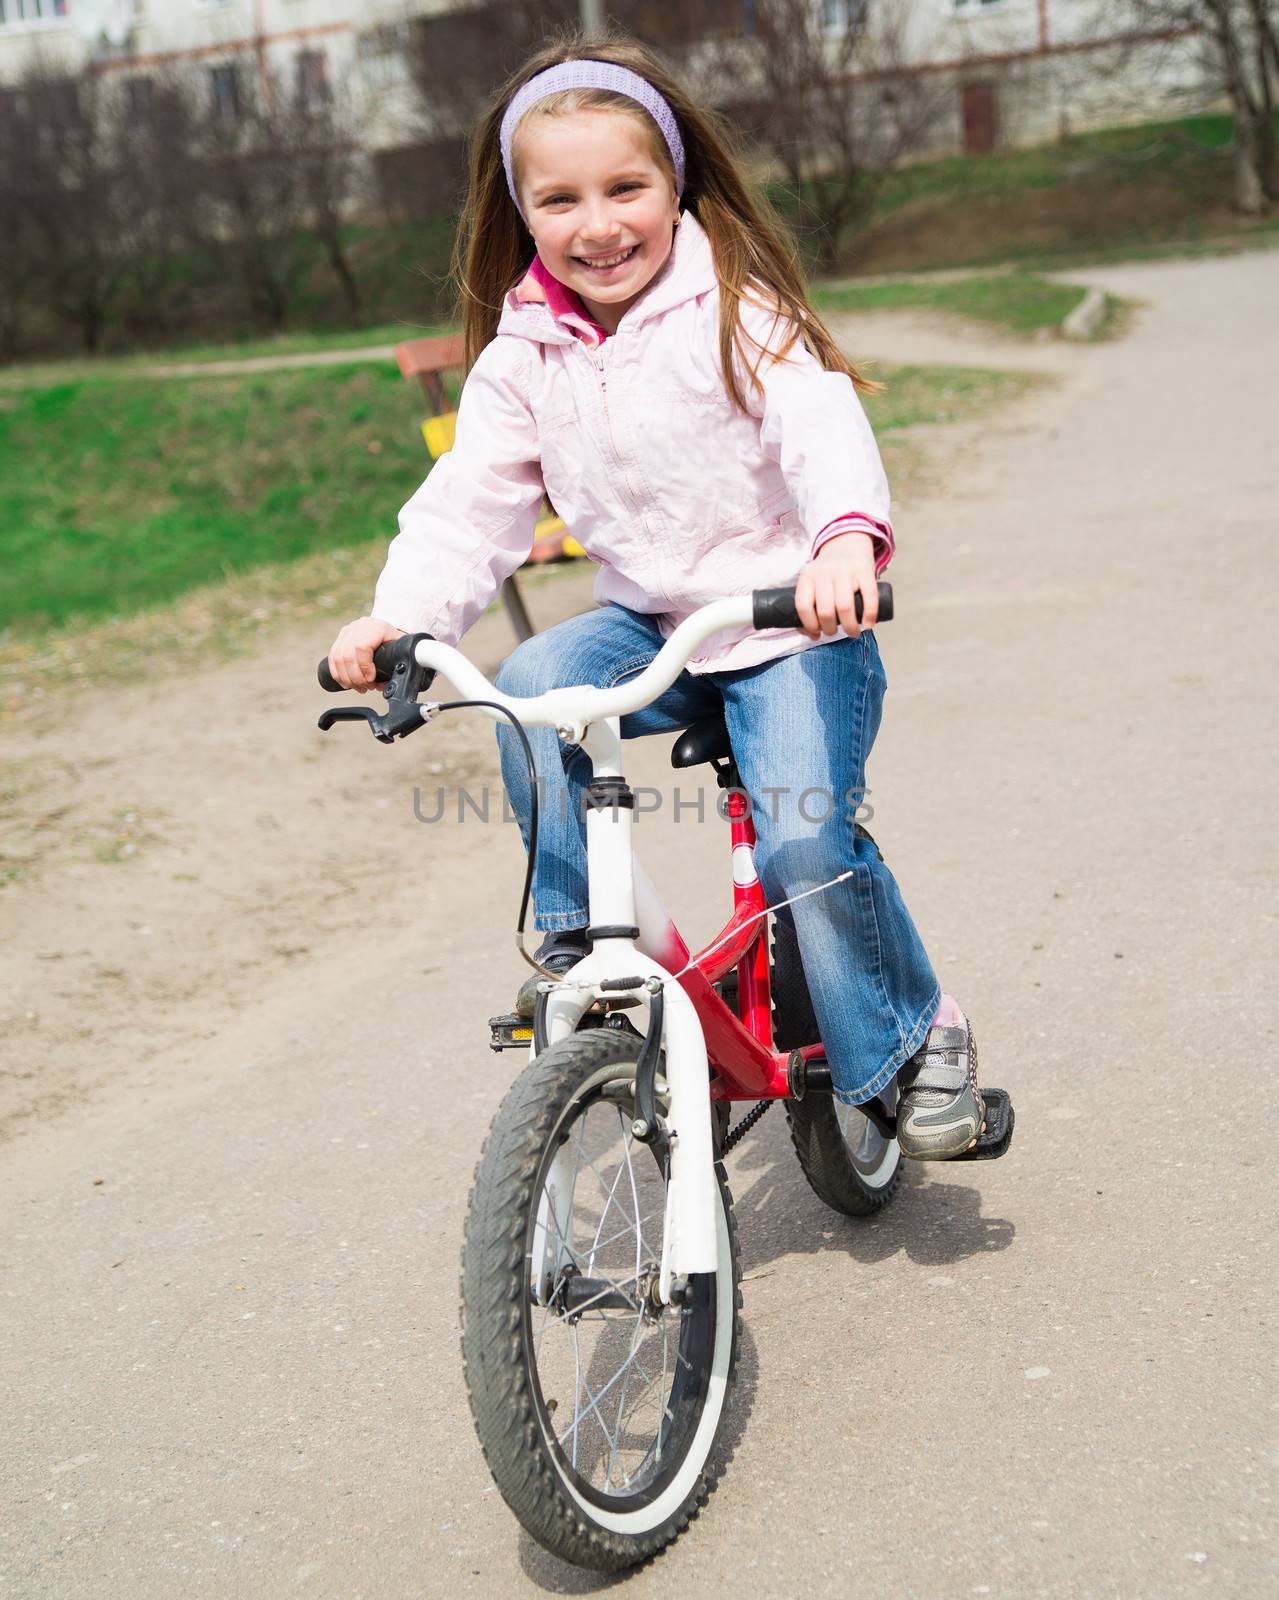 Cute smiling little girl with bicycle on road